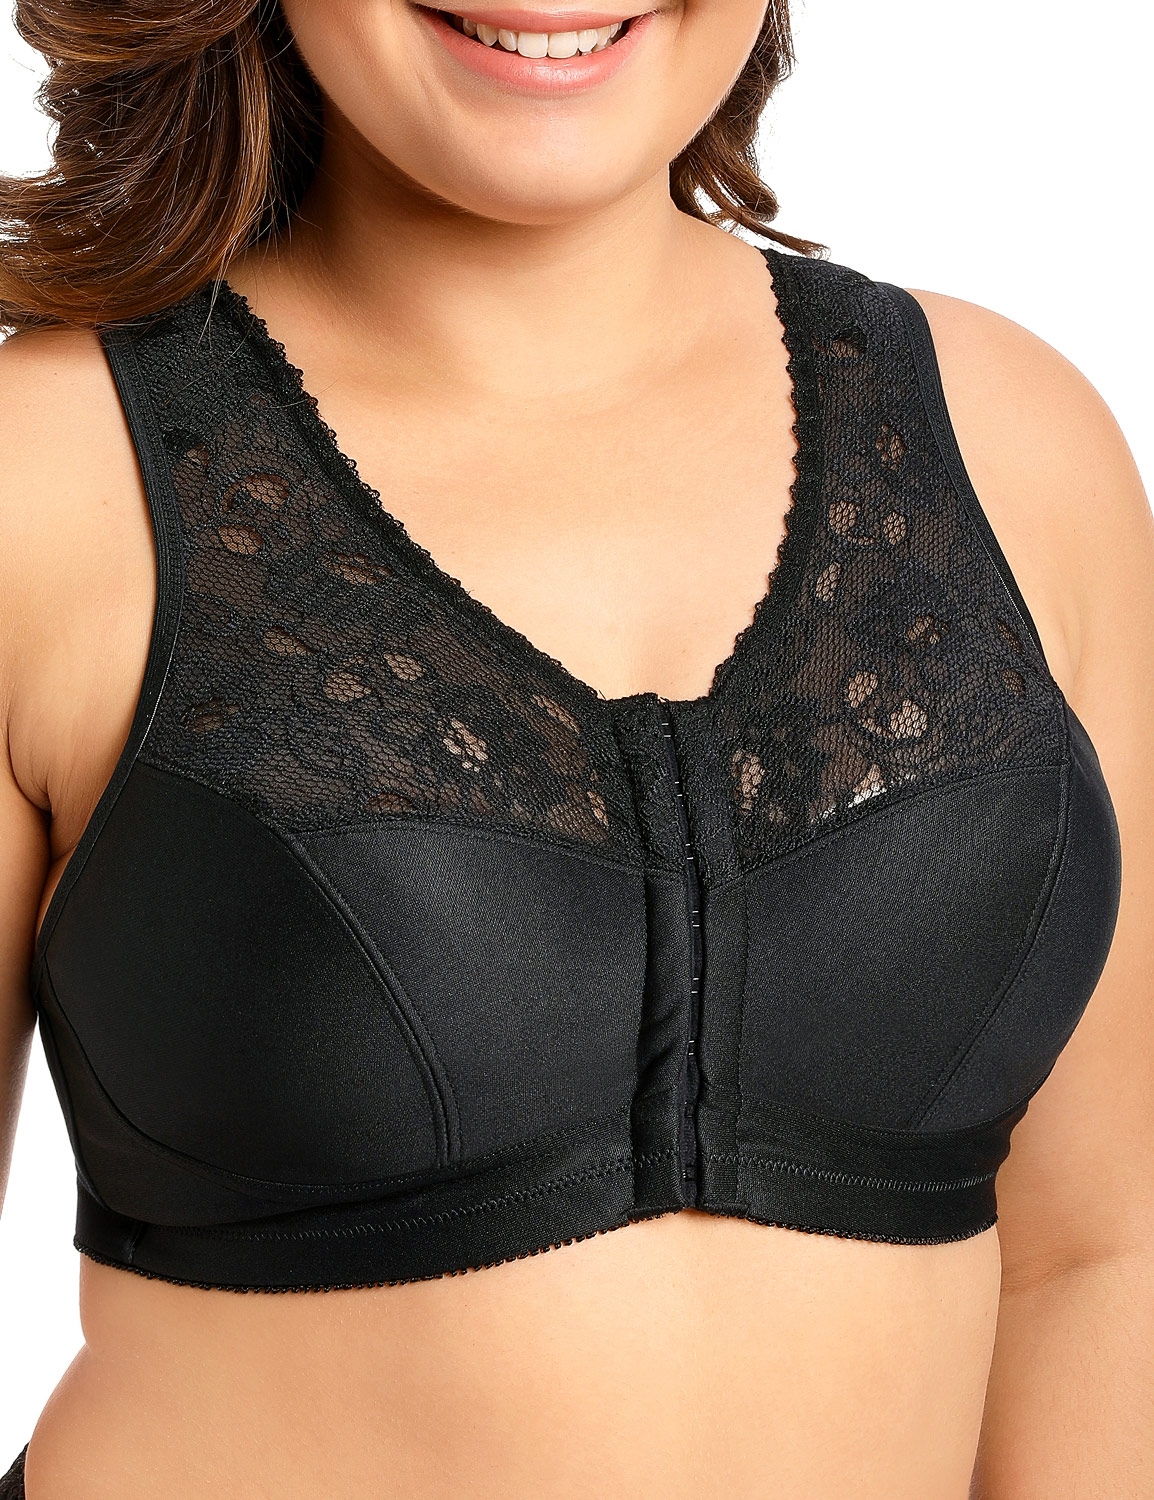 Women's Front Closure Bra Full Cup Wirefree Racerback Lace Plus Size